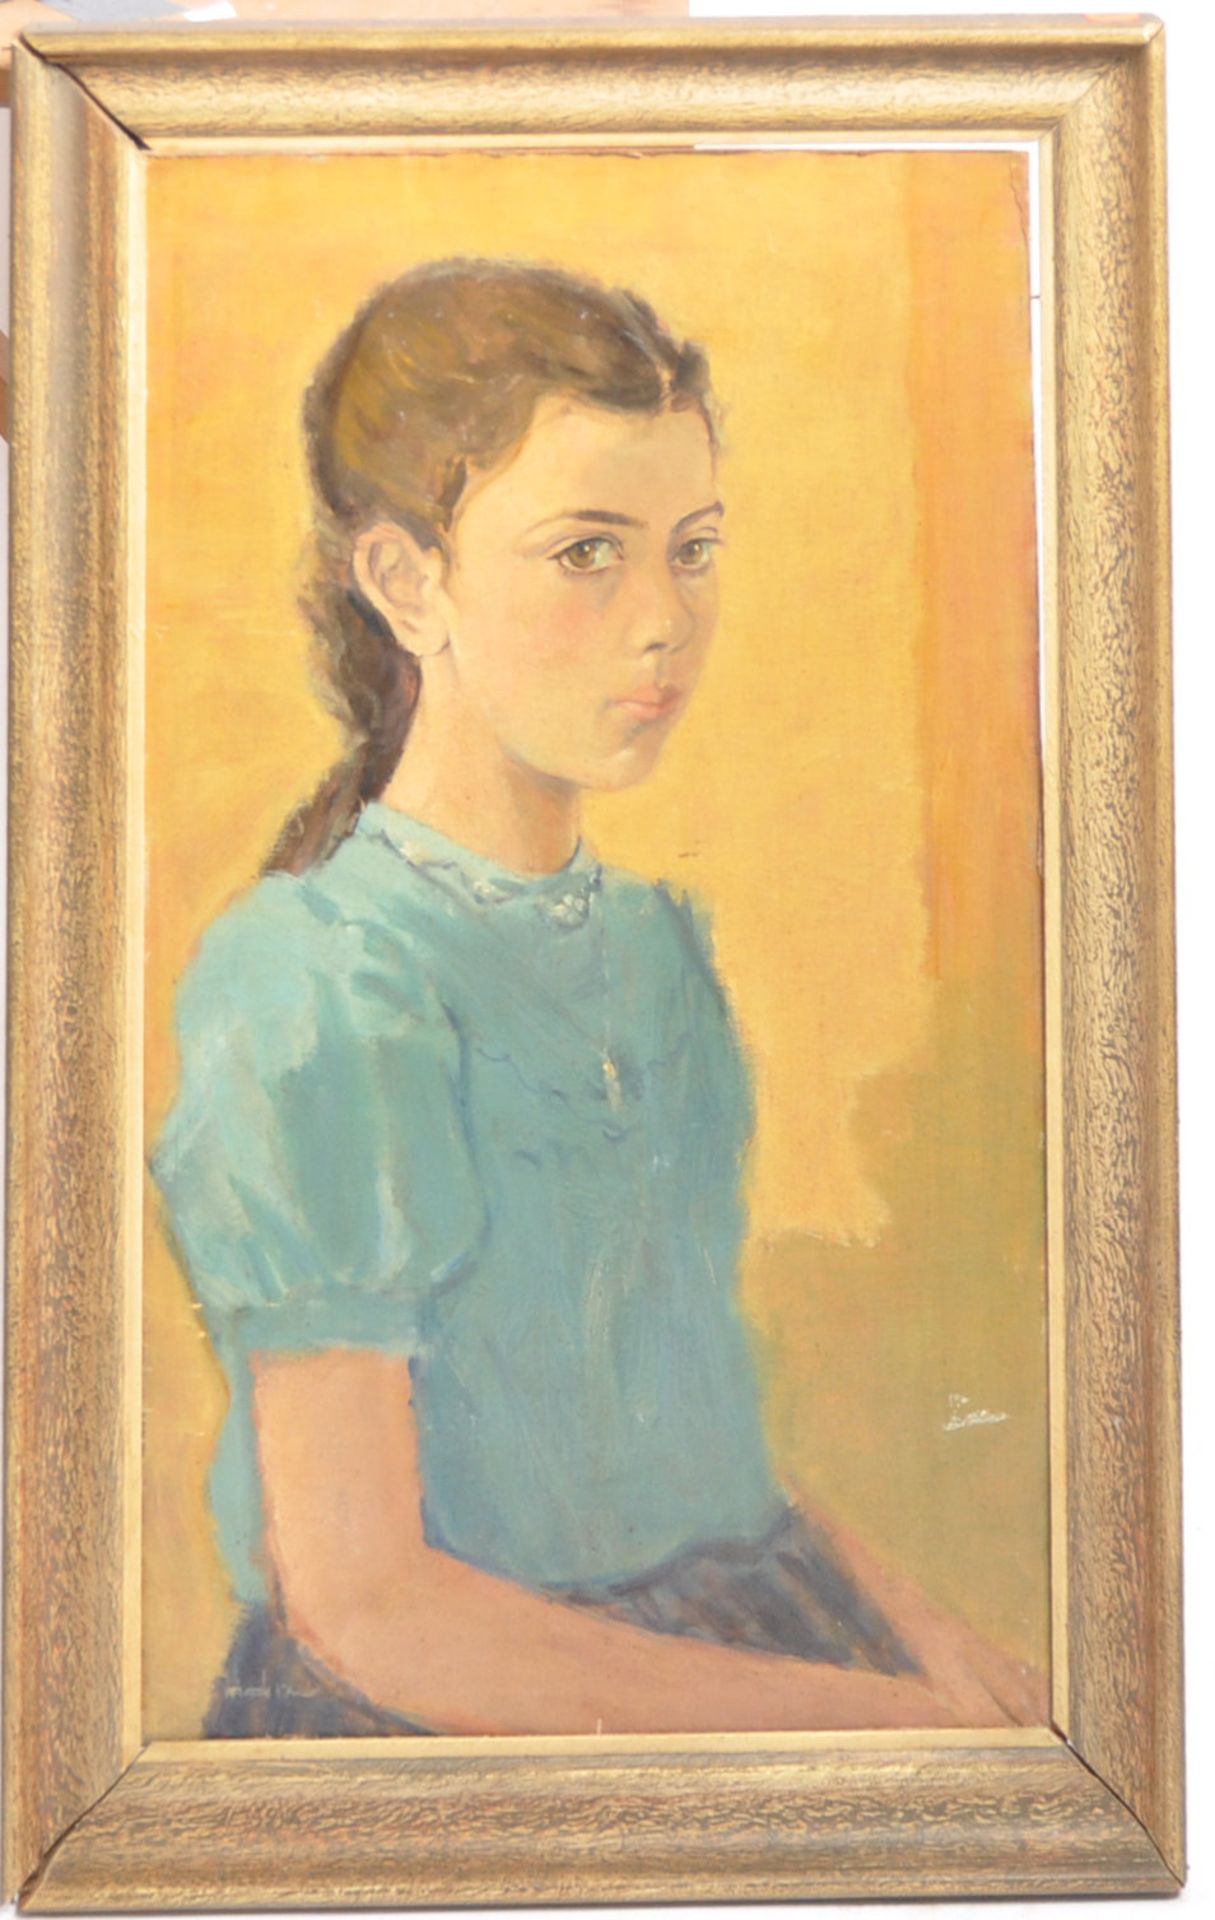 20TH CENTURY OIL ON BOARD PORTRAIT PAINTING STUDY